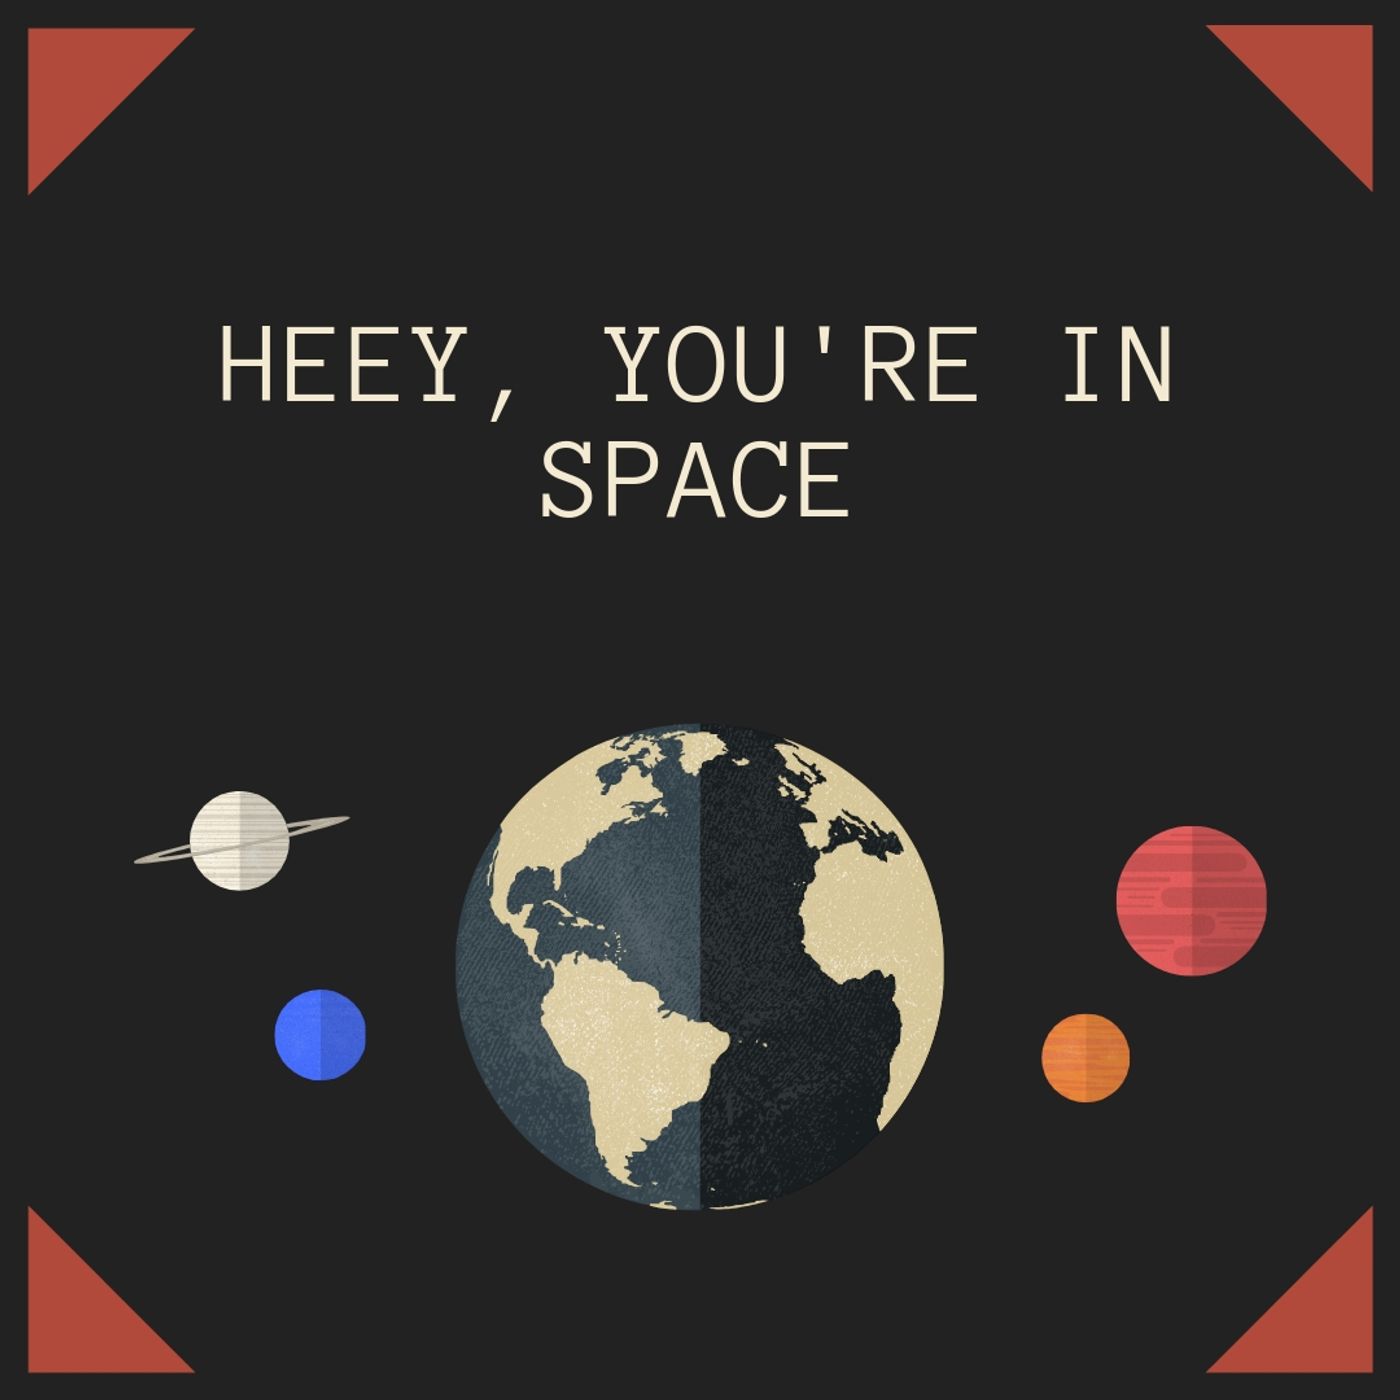 Space is life